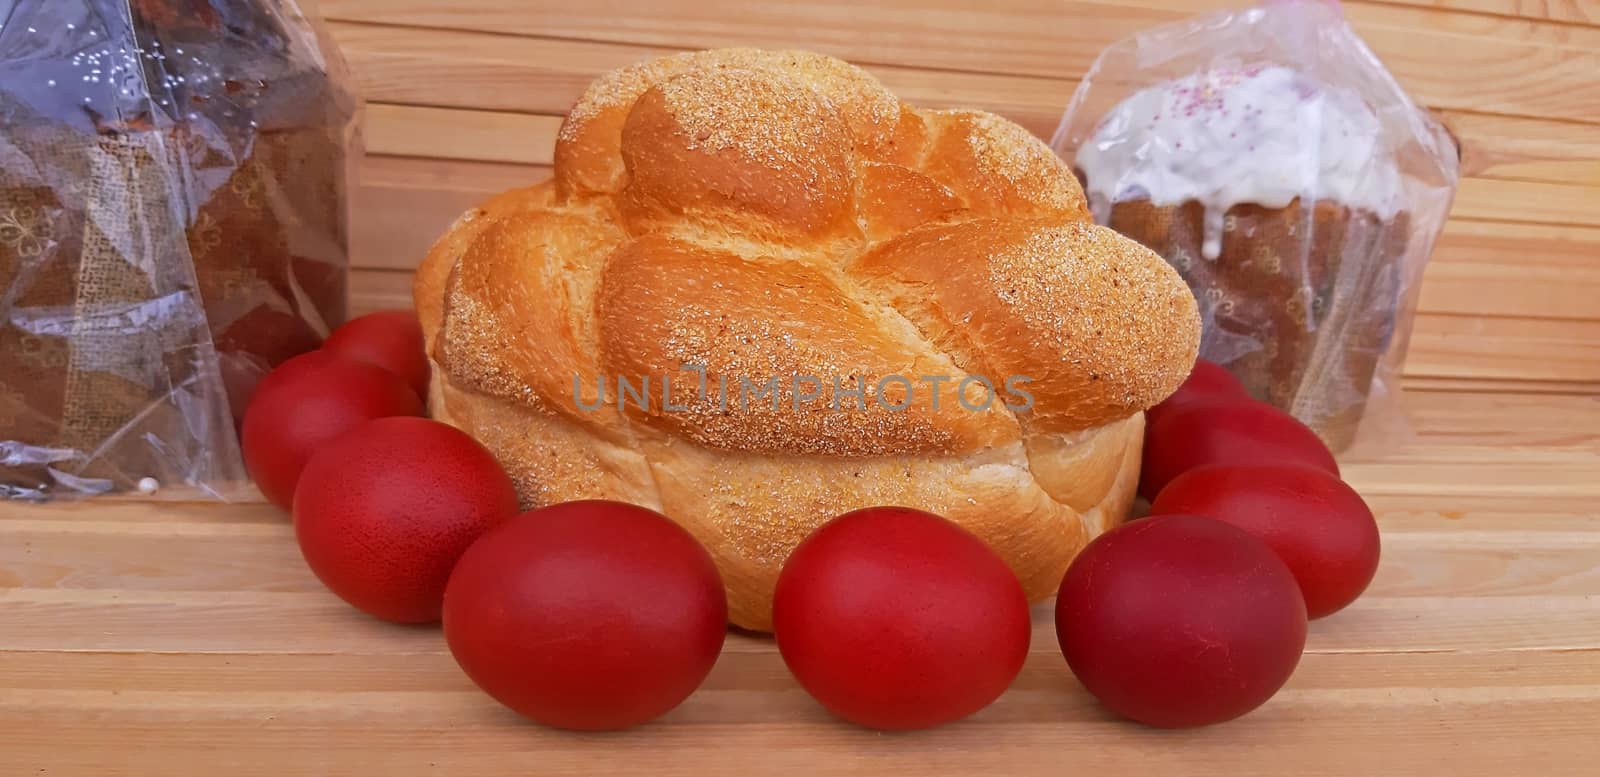 Easter red eggs and homemade bread and cakes. Easter concept by Mindru